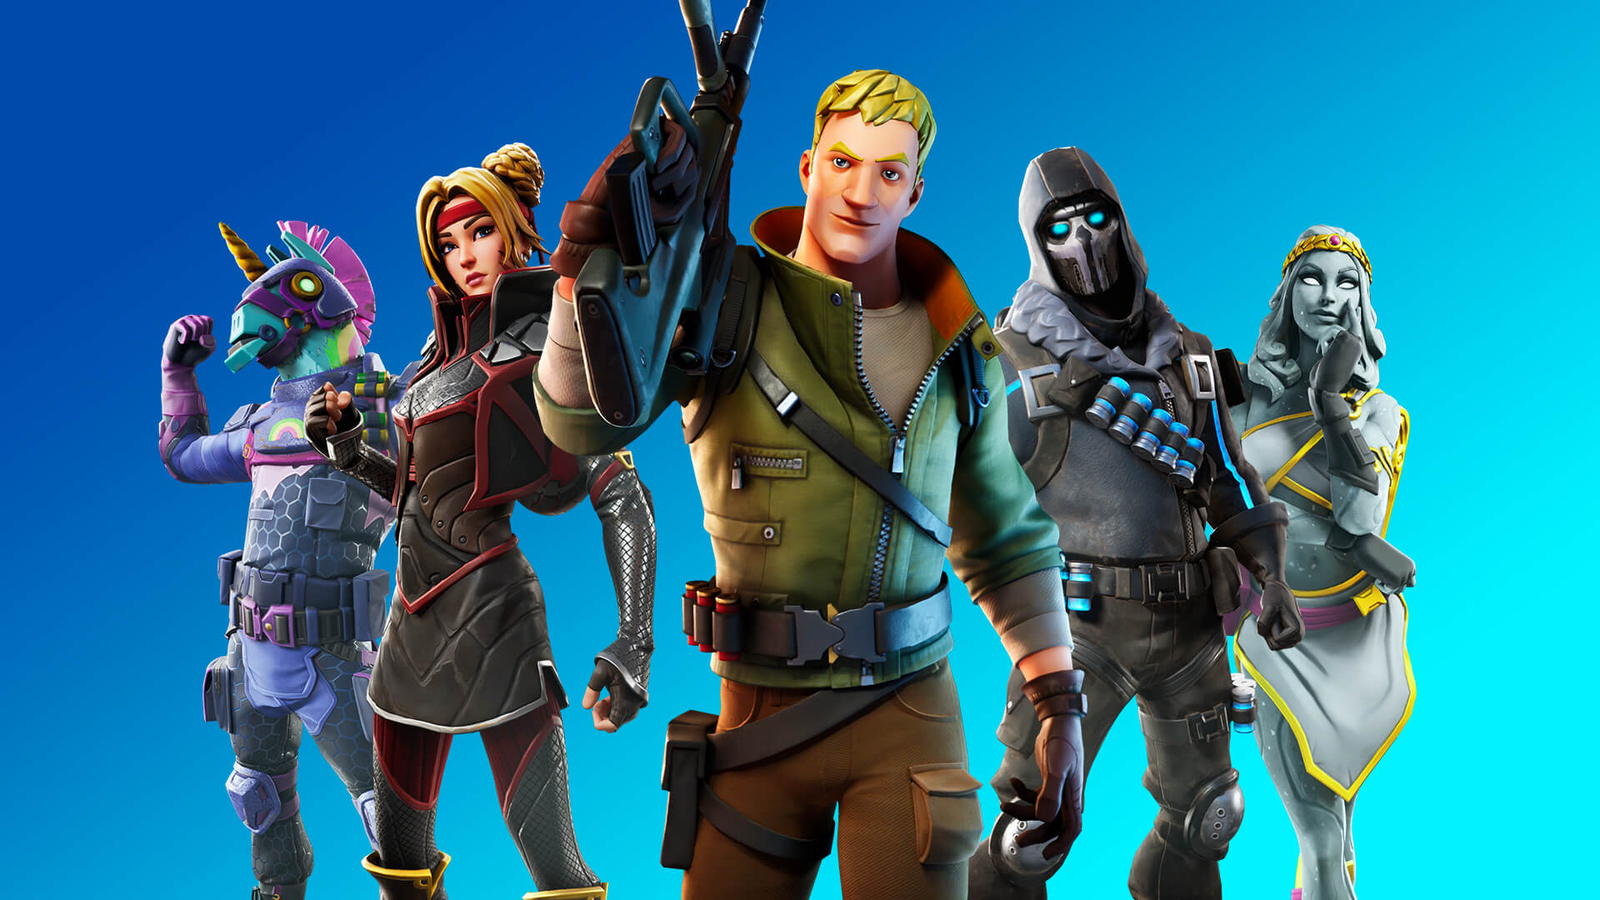 Epic Games Is Reportedly Considering Making a Fortnite Movie - IGN